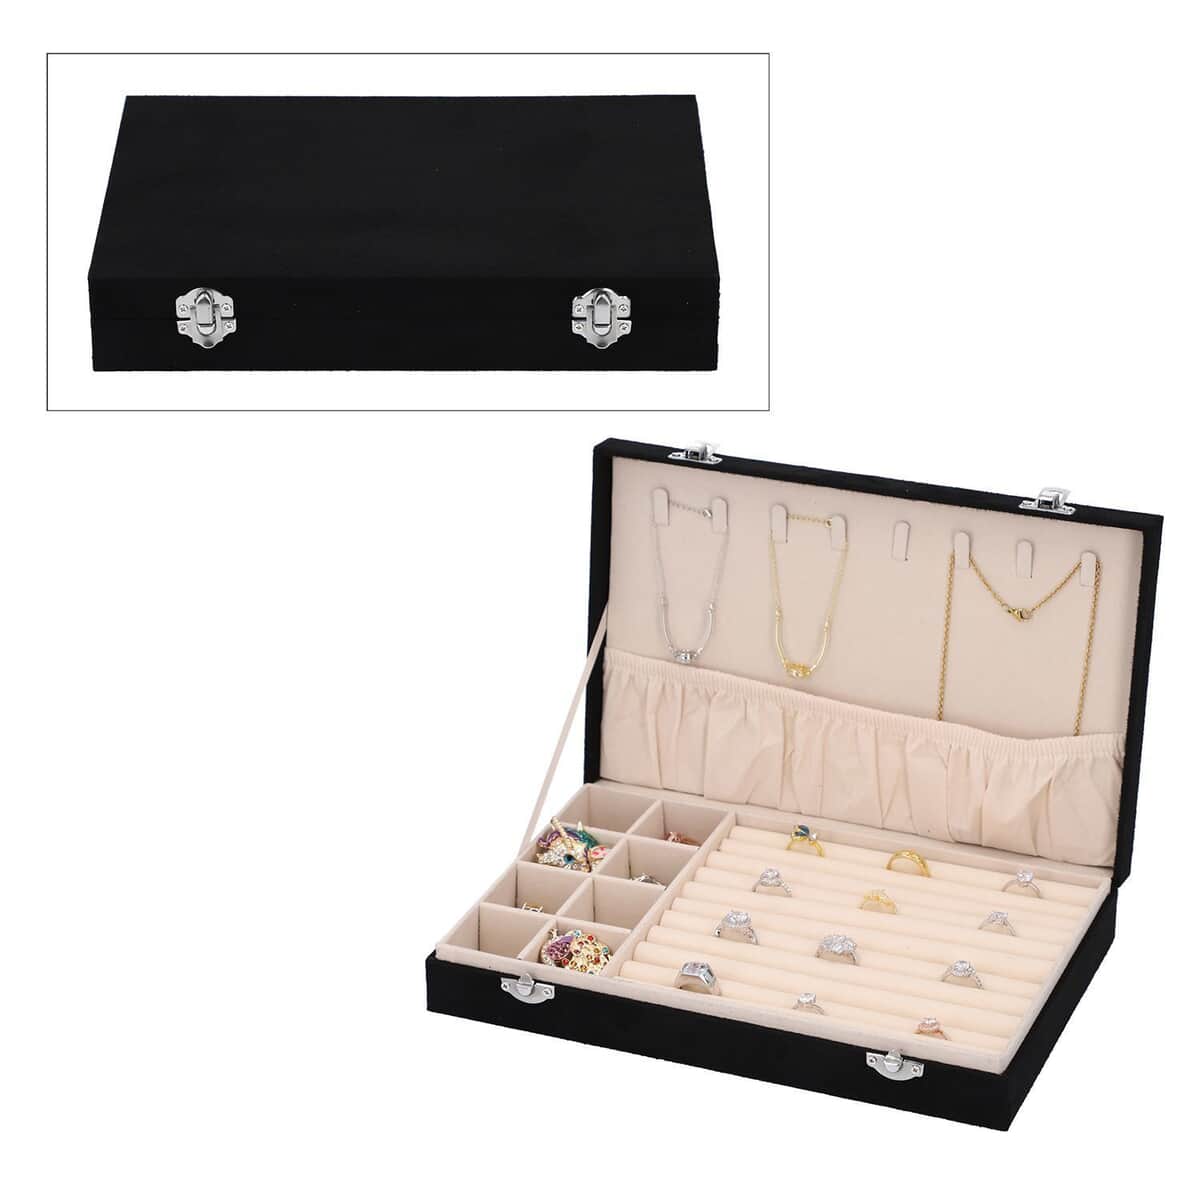 Black Velvet Jewelry Box with Anti Tarnish Lining & Lock (8 Necklace Hooks, 8 Earrings/Pendant Sections and Approx 10 Rings Slots) (11.4"x7.3"x2") image number 0